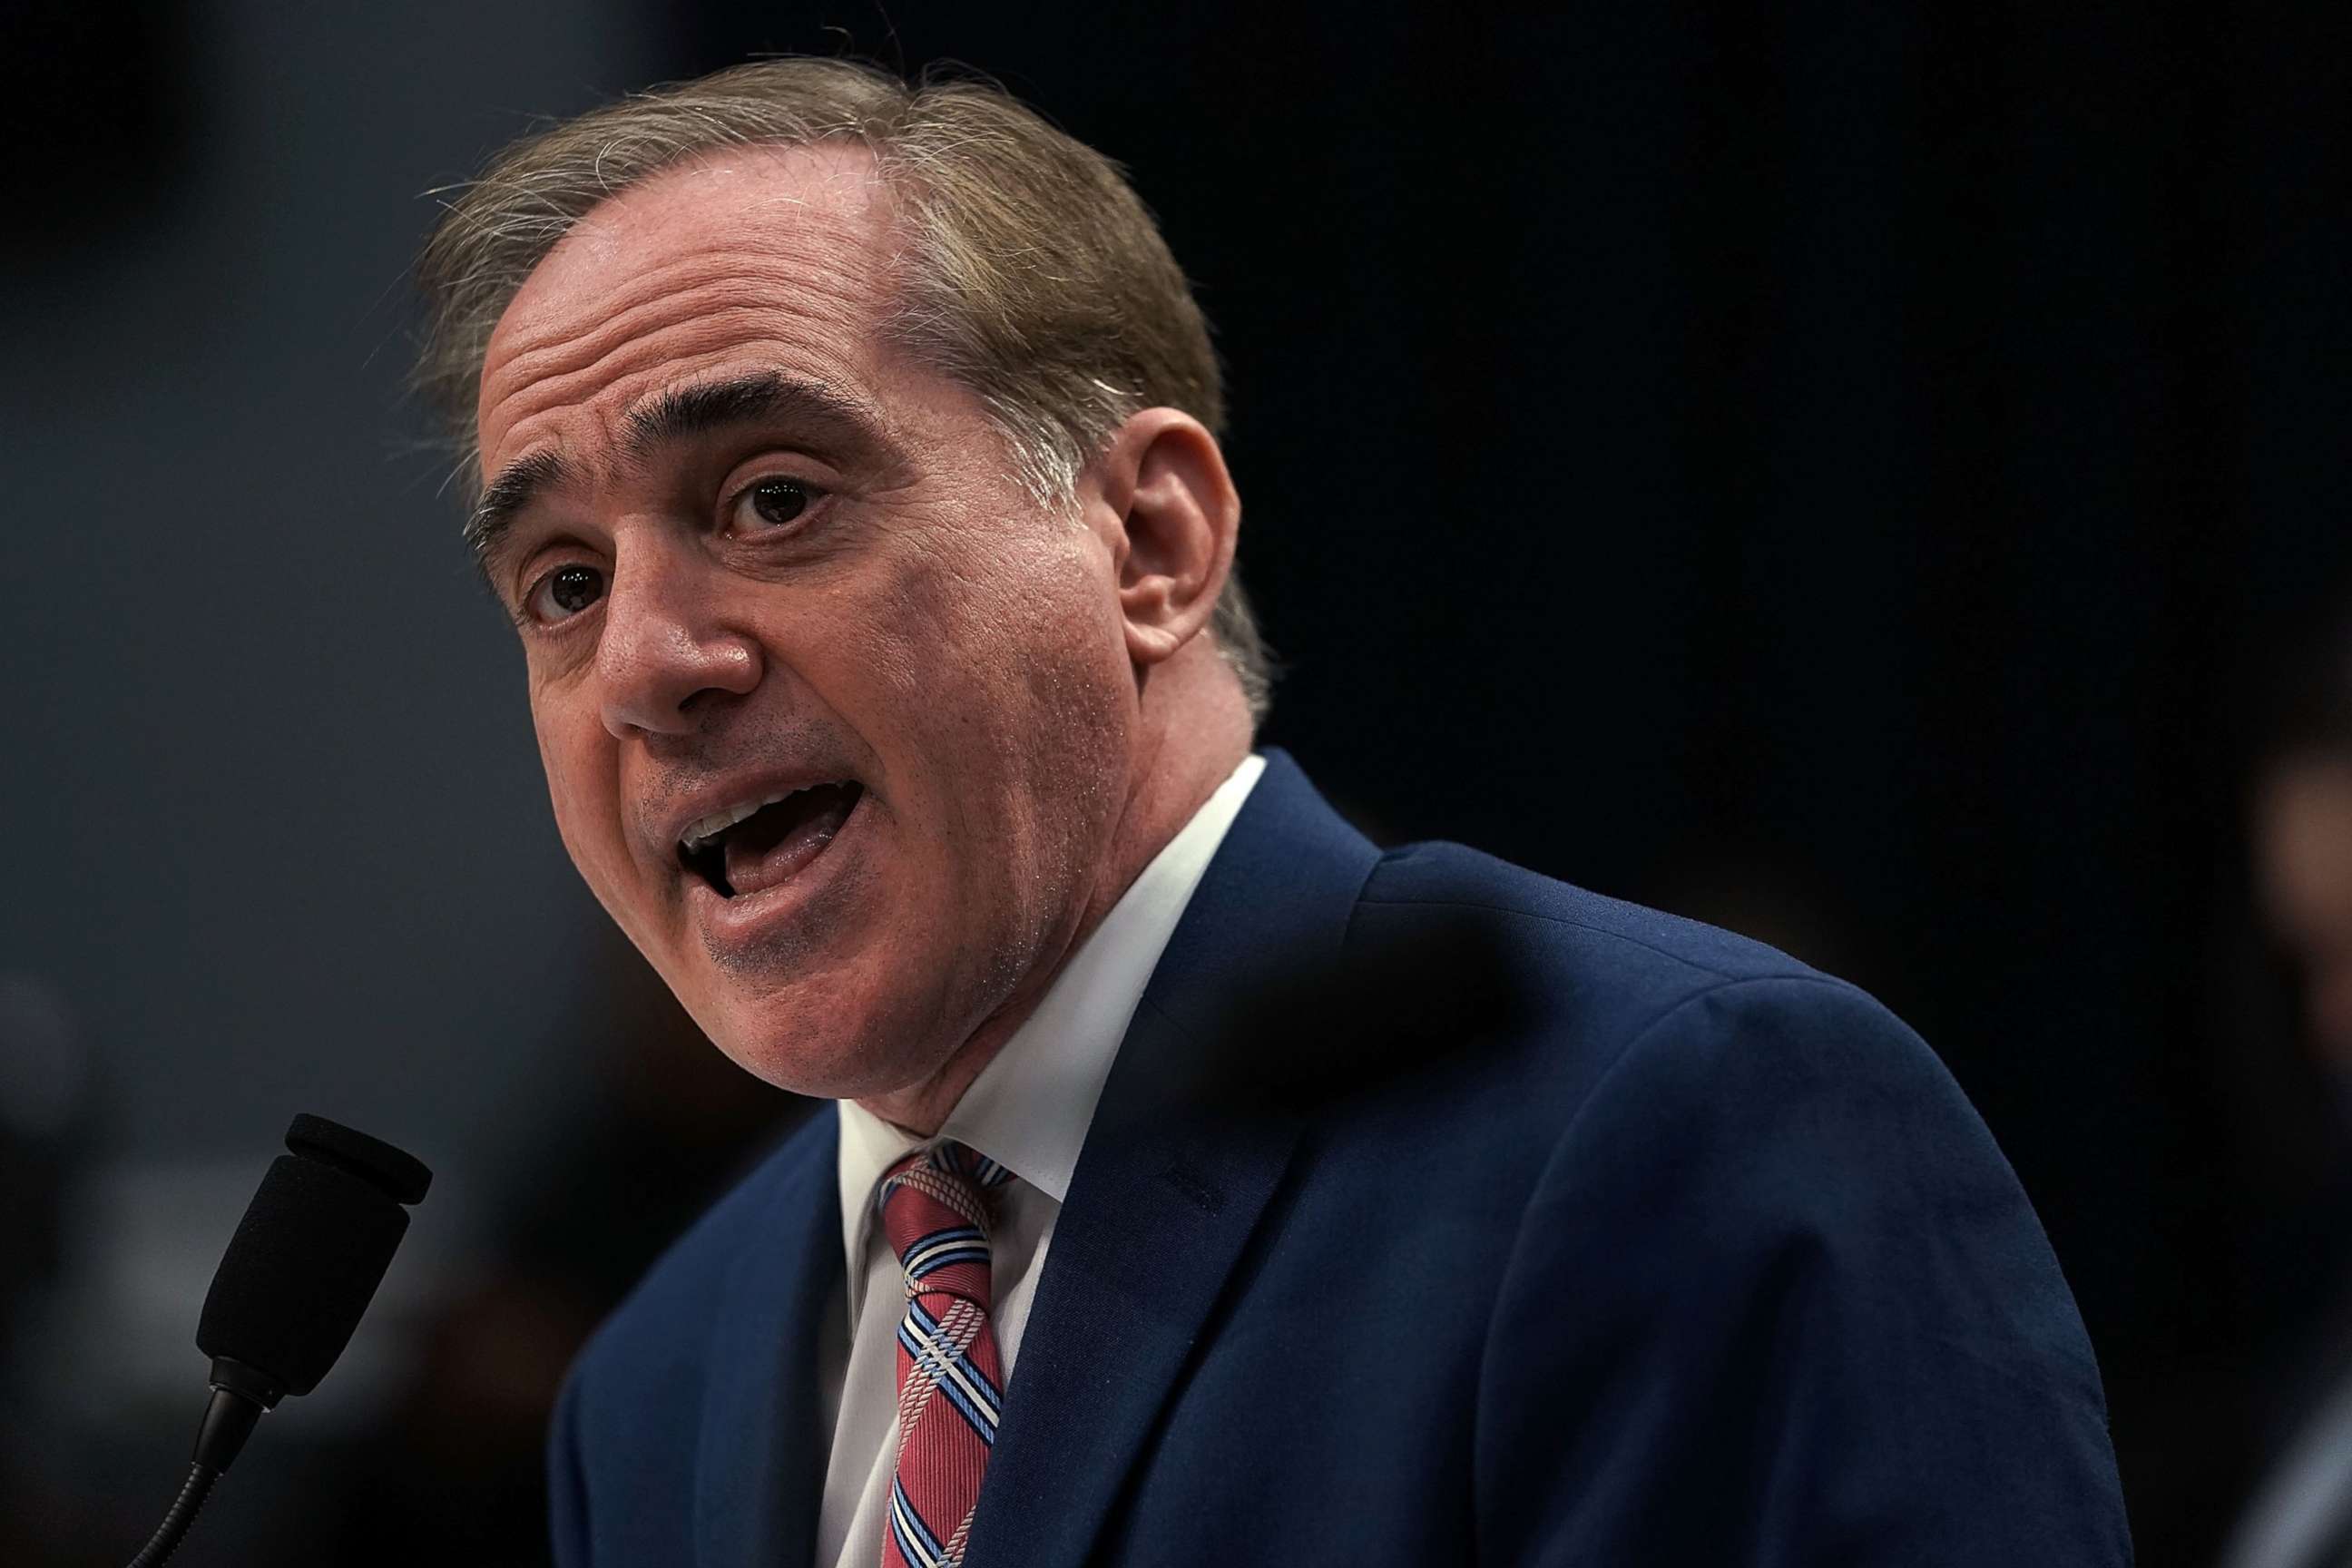 PHOTO: Secretary of Veterans Affairs David Shulkin testifies during a hearing before the Military Construction, Veterans Affairs, and Related Agencies Subcommittee of House Appropriations Committee March 15, 2018 on Capitol Hill in Washington.